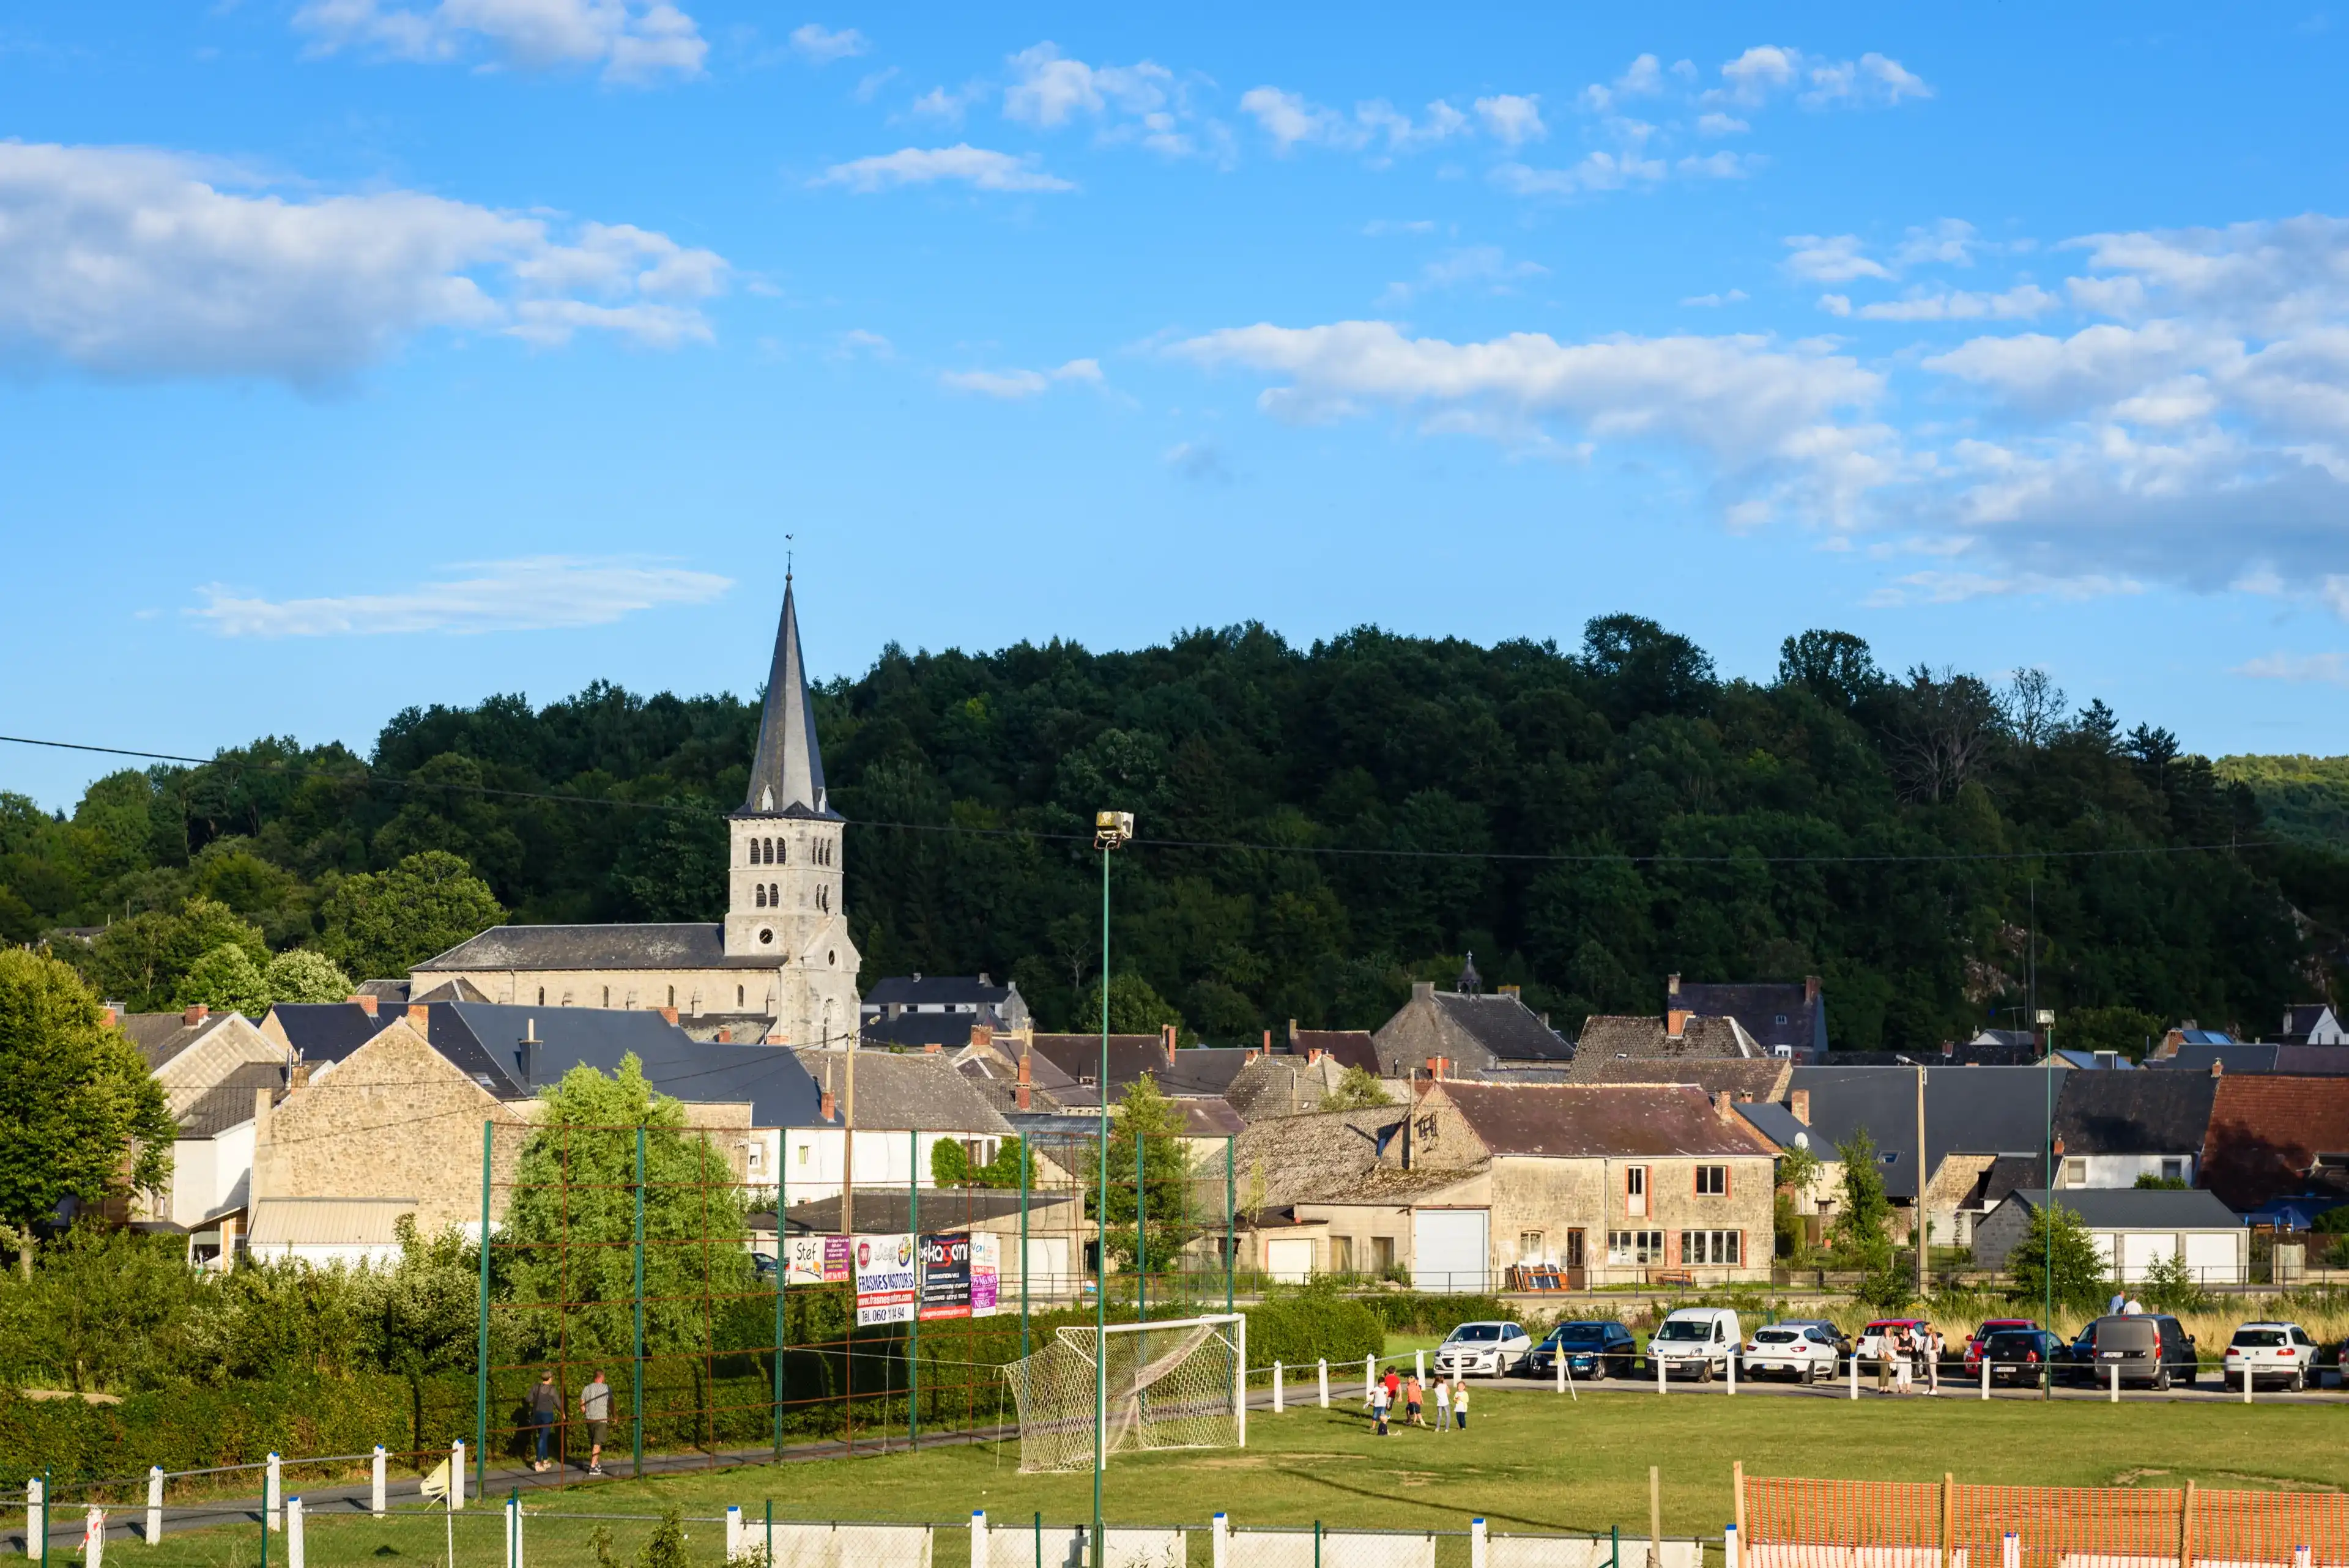 PETIGNY, COUVIN, WALLONIA, BELGIUM - JULY 29, 2017: Small countryside town of Petigny with church tower and football field with hill in background on July 29 in Petigny, Couvin, Wallonia in Belgium.